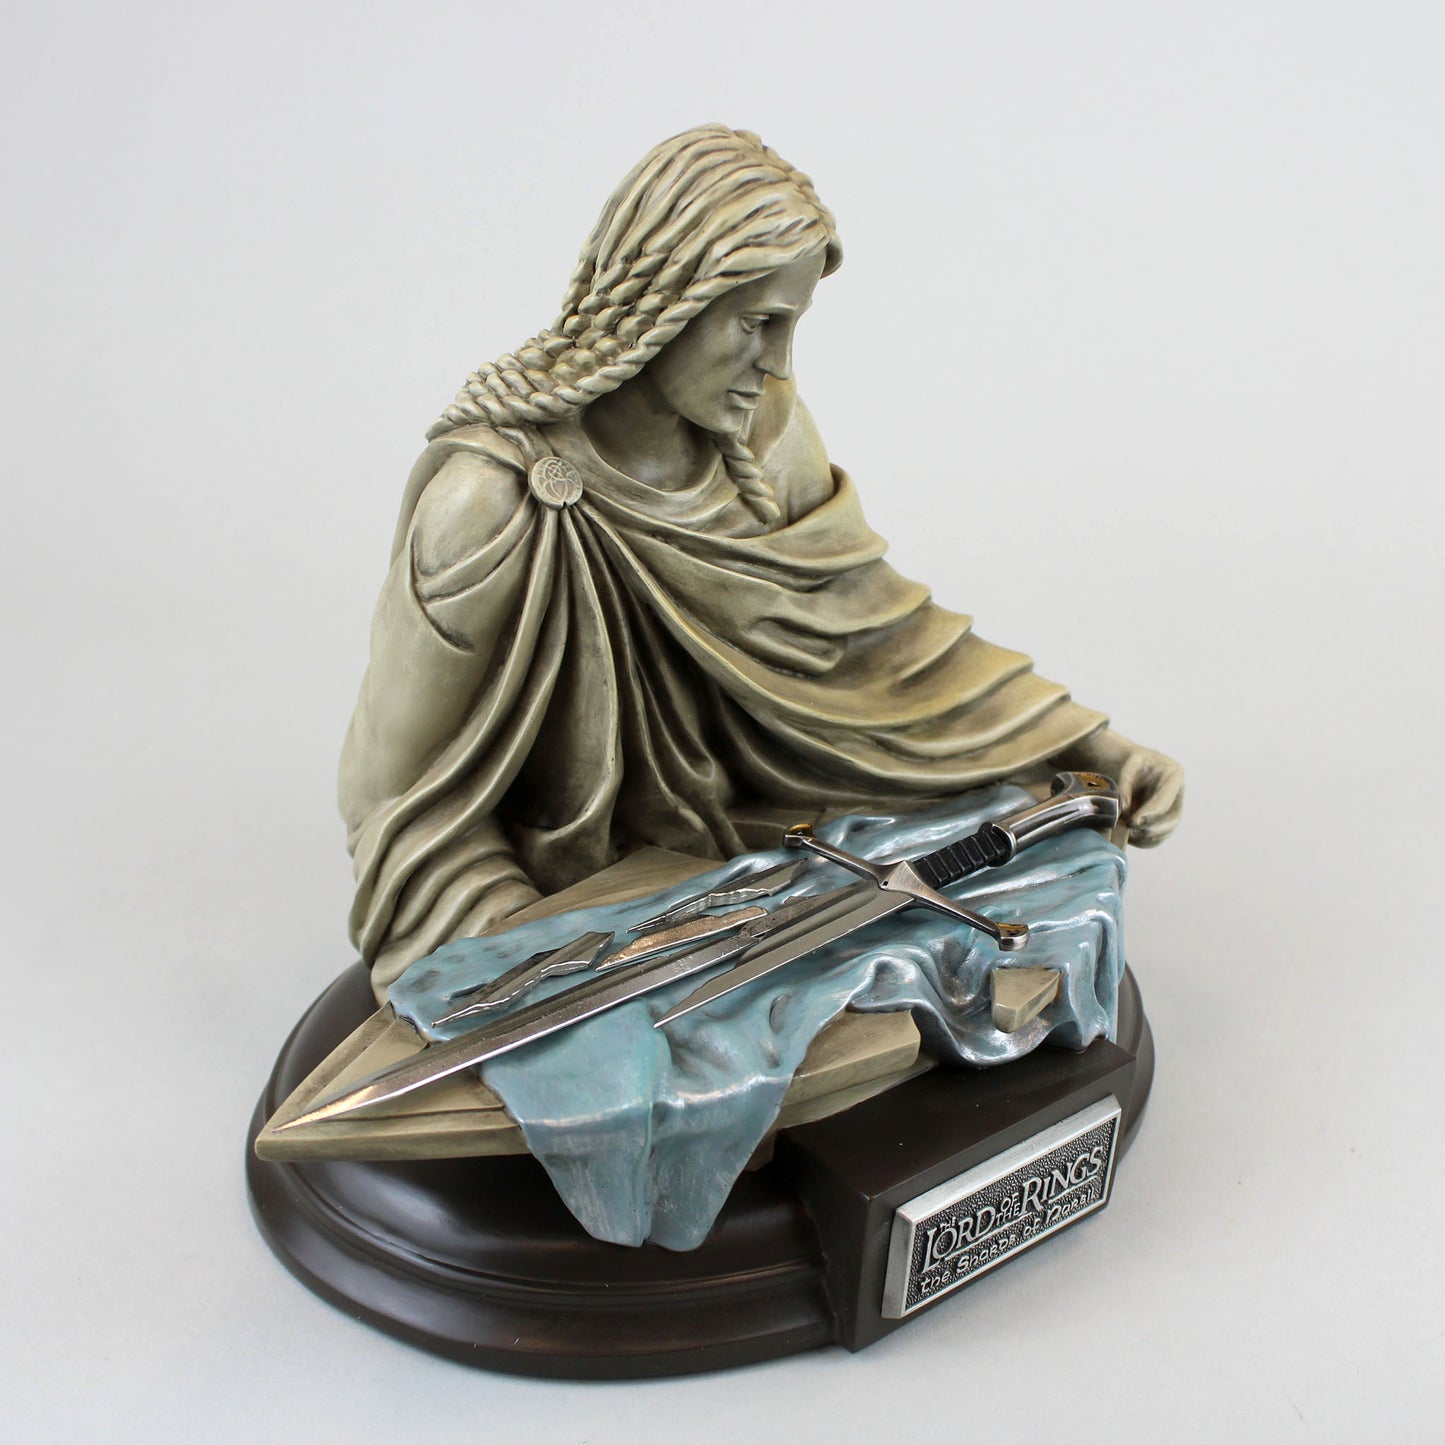 Shards of Narsil in Rivendell Statue (Lord of the Rings) 1:5 Scale Miniature Replica